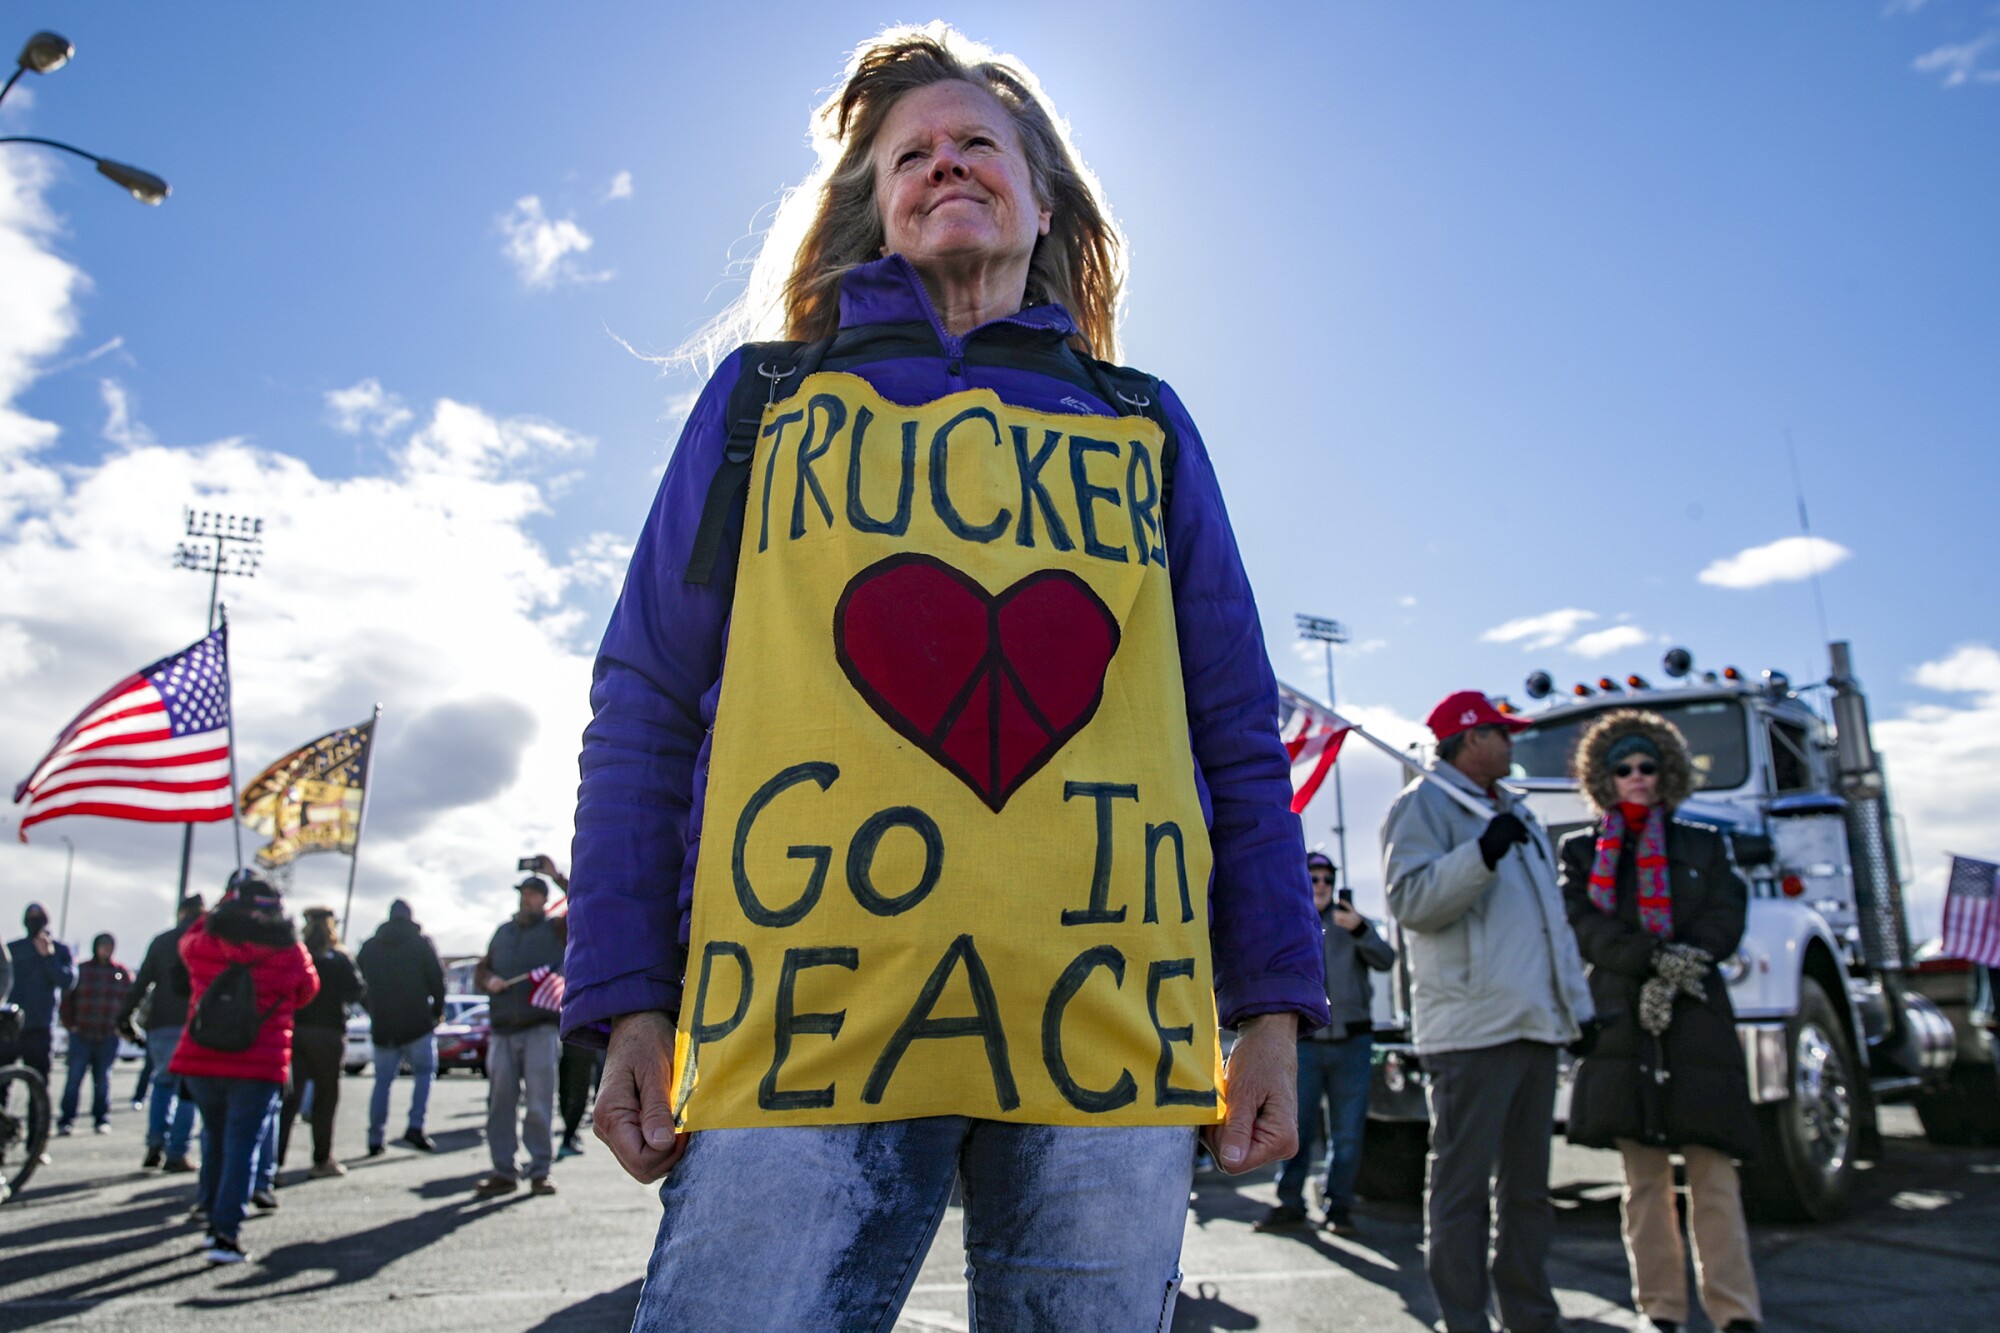 A person wears a sign reading "Truckers, go in peace" 